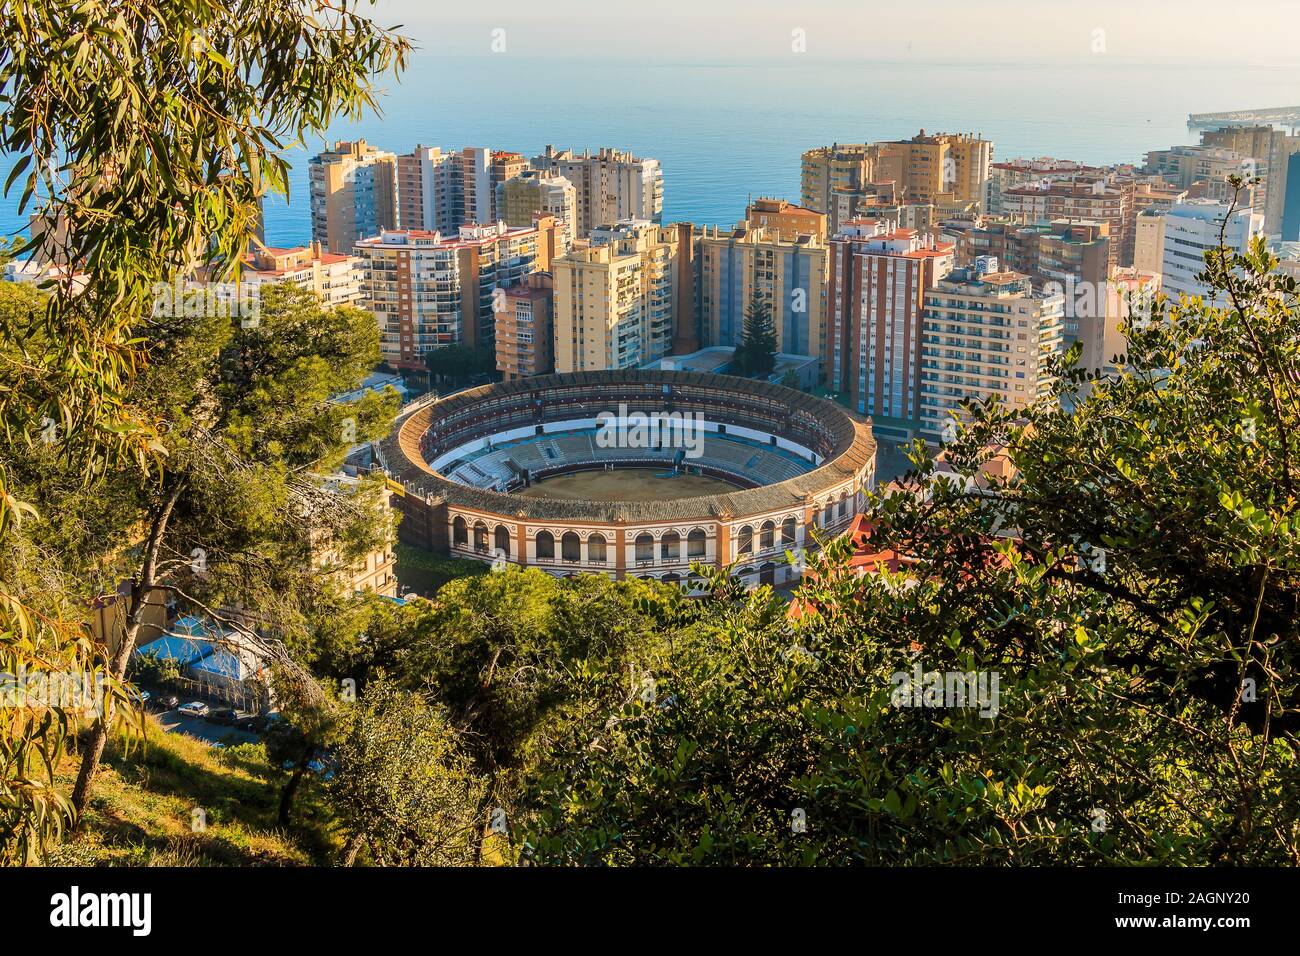 View of the bullring on the Spanish coast in Malaga. In the middle between high-rise buildings with a view over the roofs of Malaga with sunshine Stock Photo